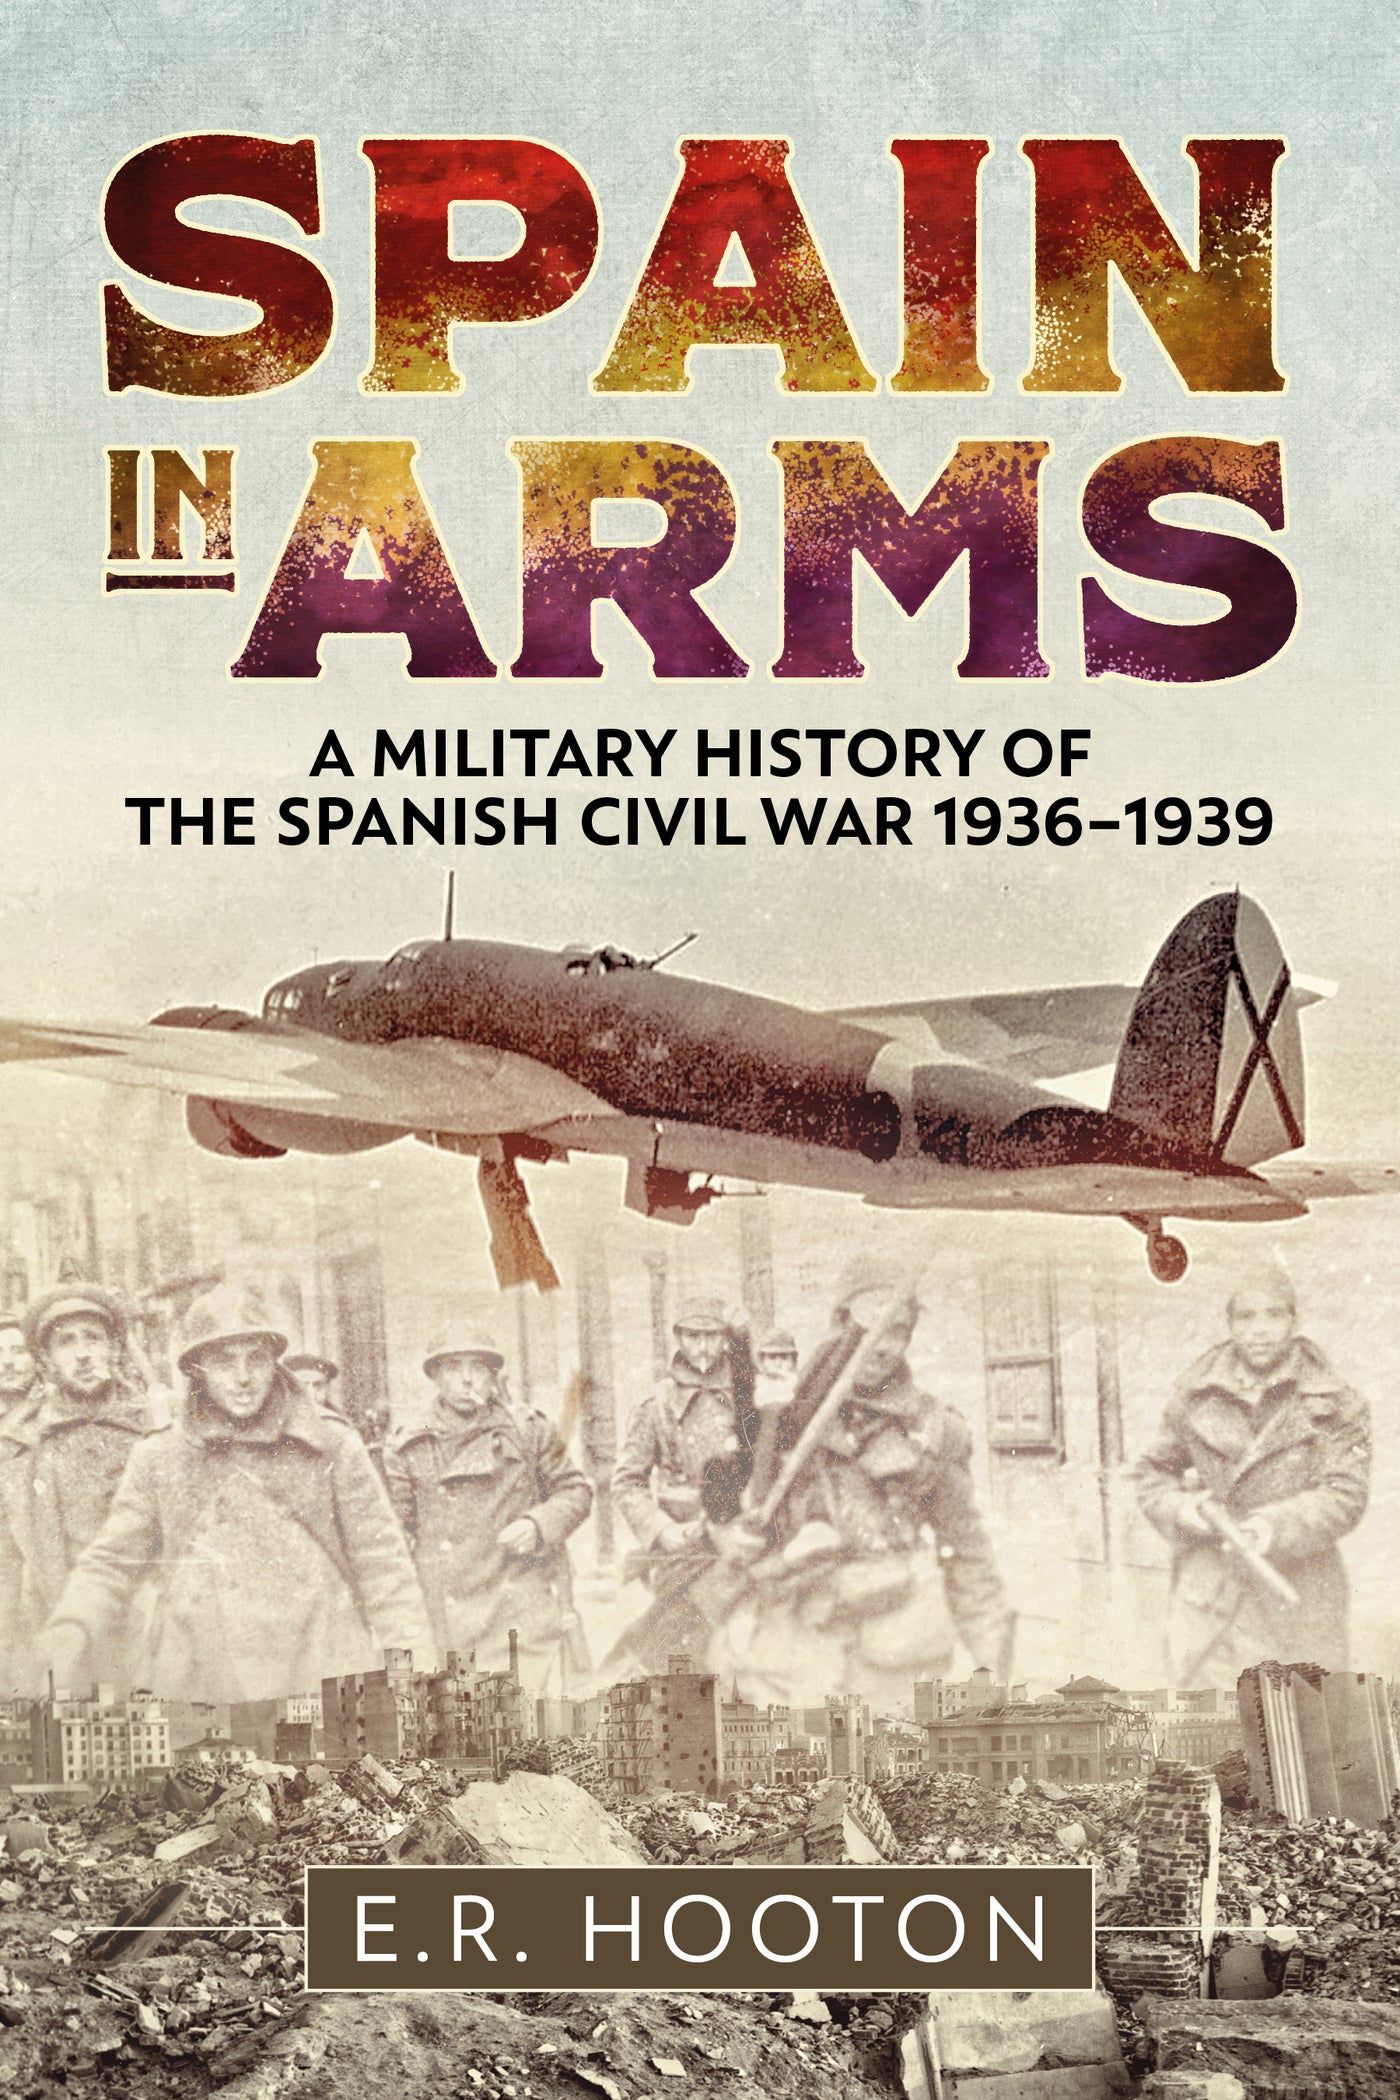 Spain in Arms